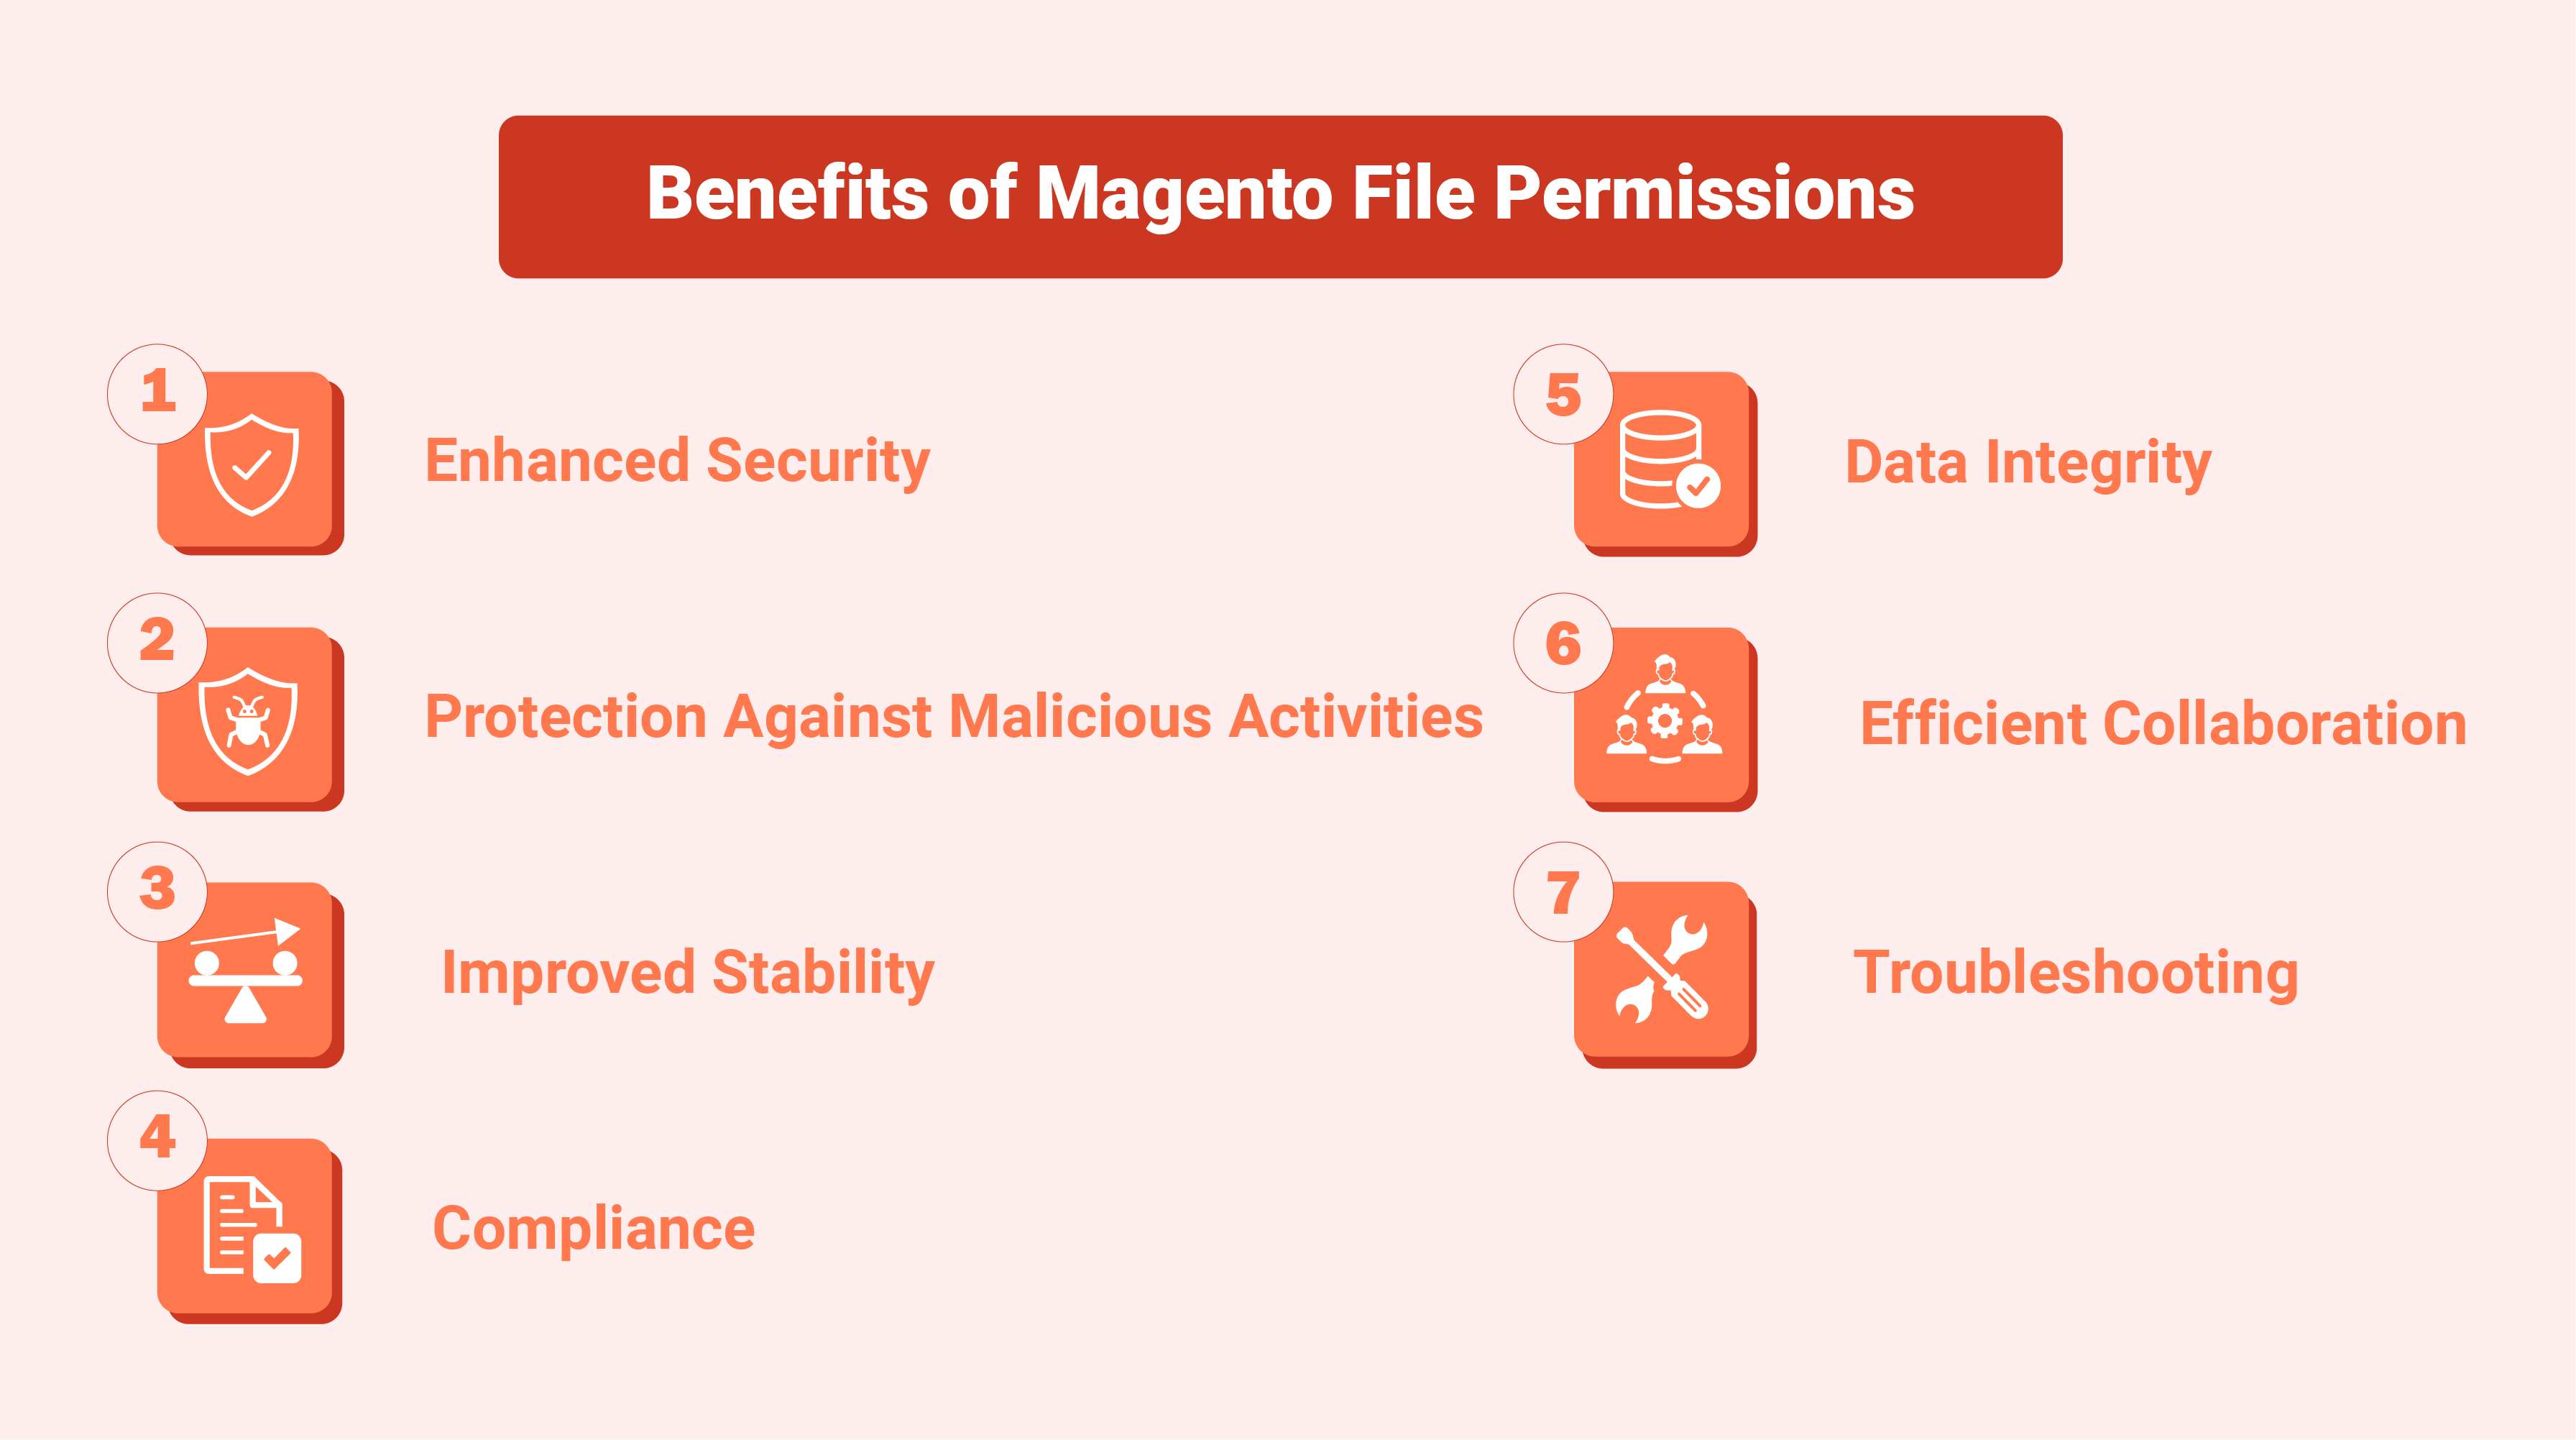 Benefits of Magento File Permissions